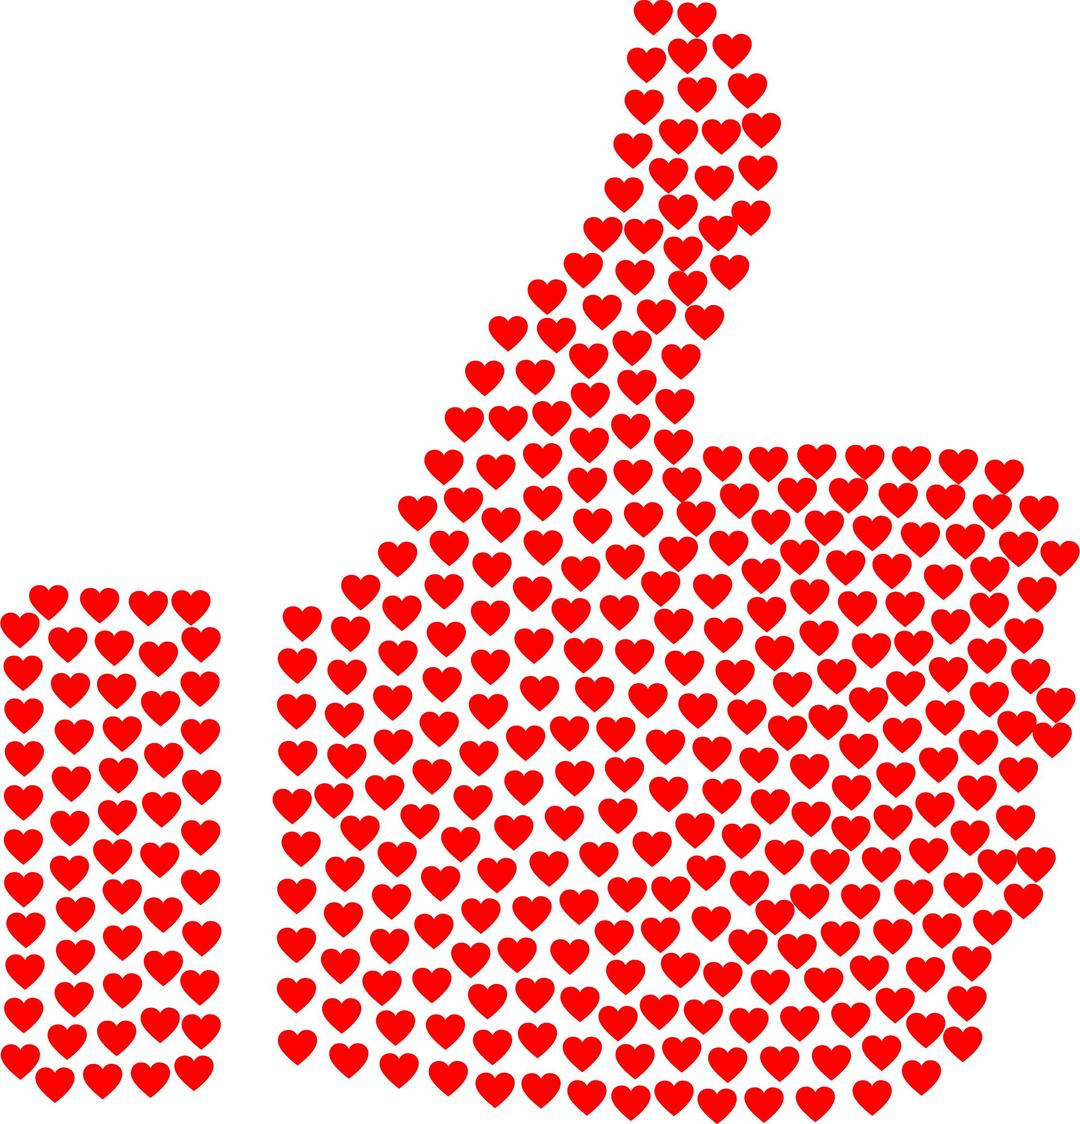 Hearts Thumbs Up Silhouette png transparent